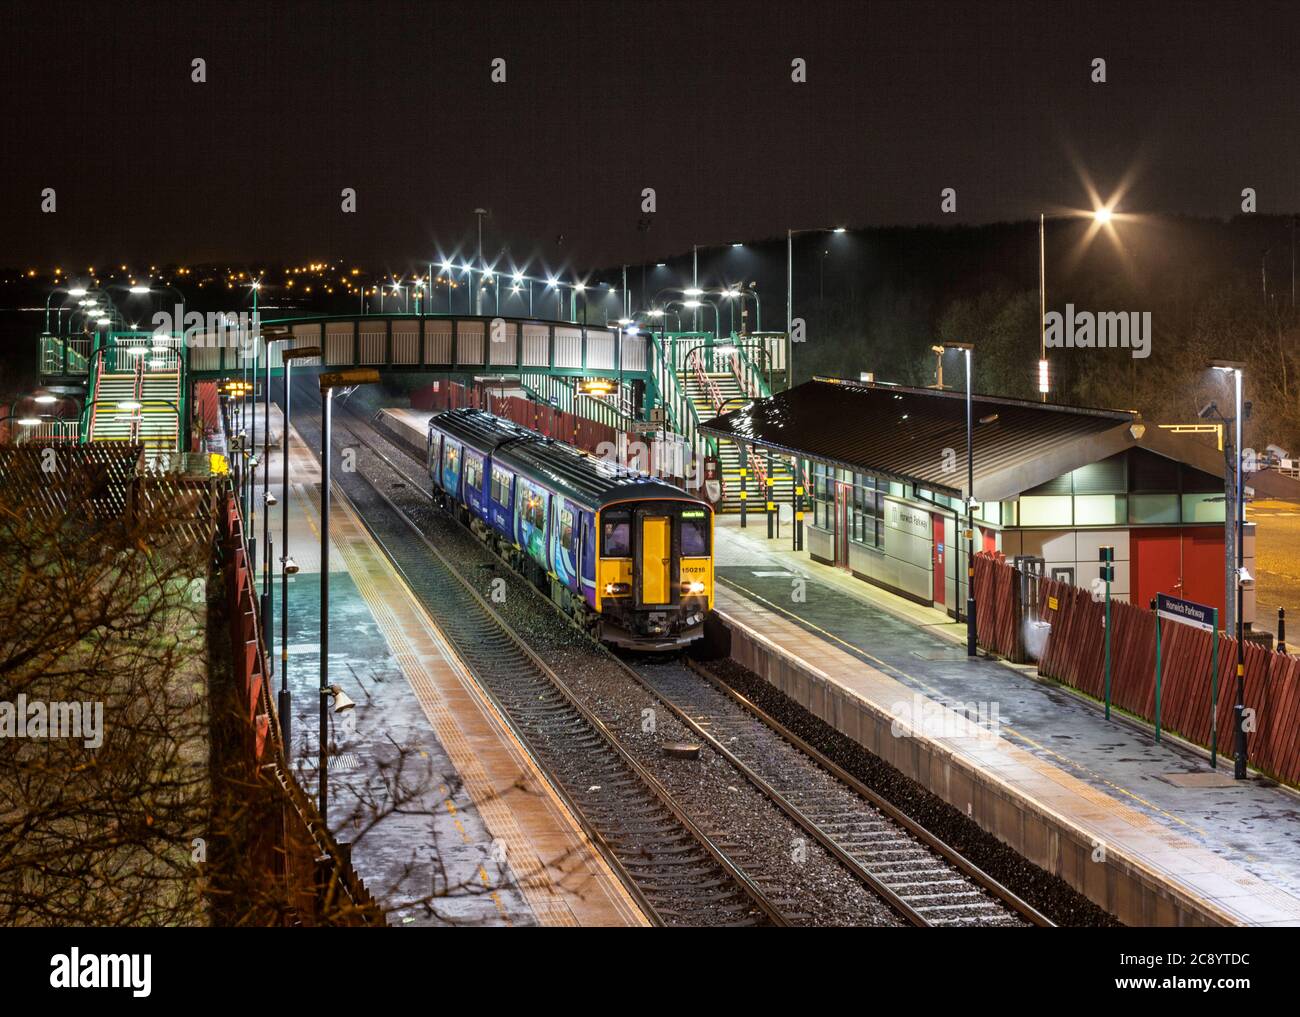 Northern rail / Northern trains class 150 diesel train at Horwich Parkway railway station at night. Stock Photo